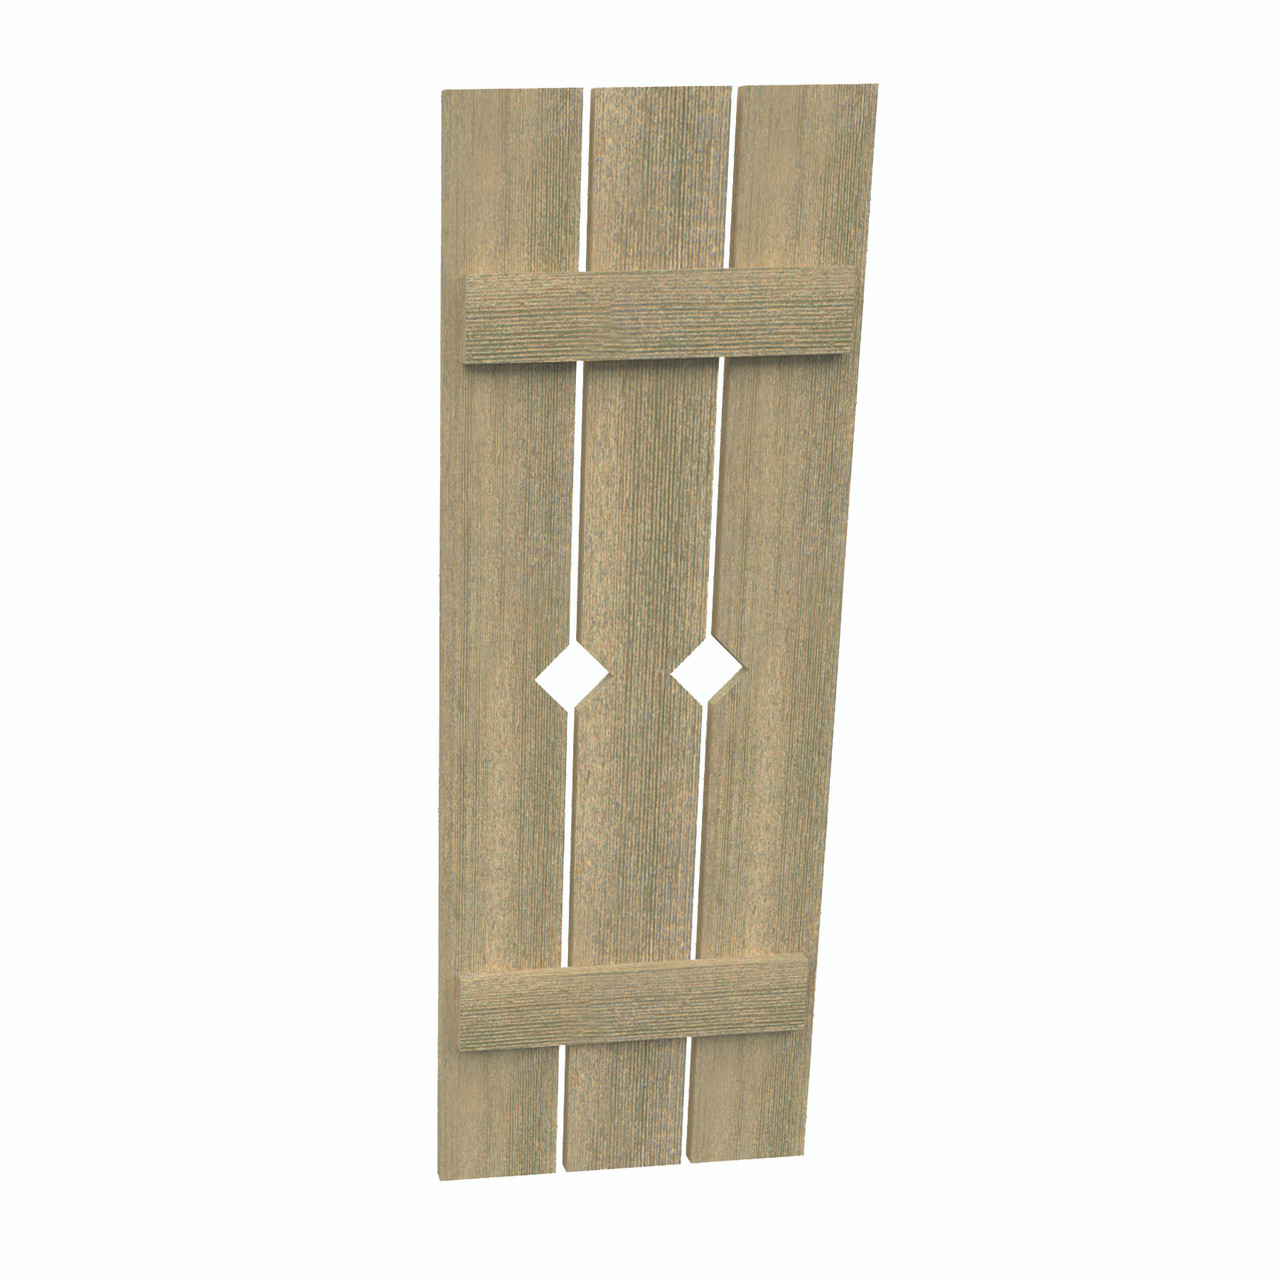 18 inch by 107 inch Plank Shutter with 3-Plank, Diamond